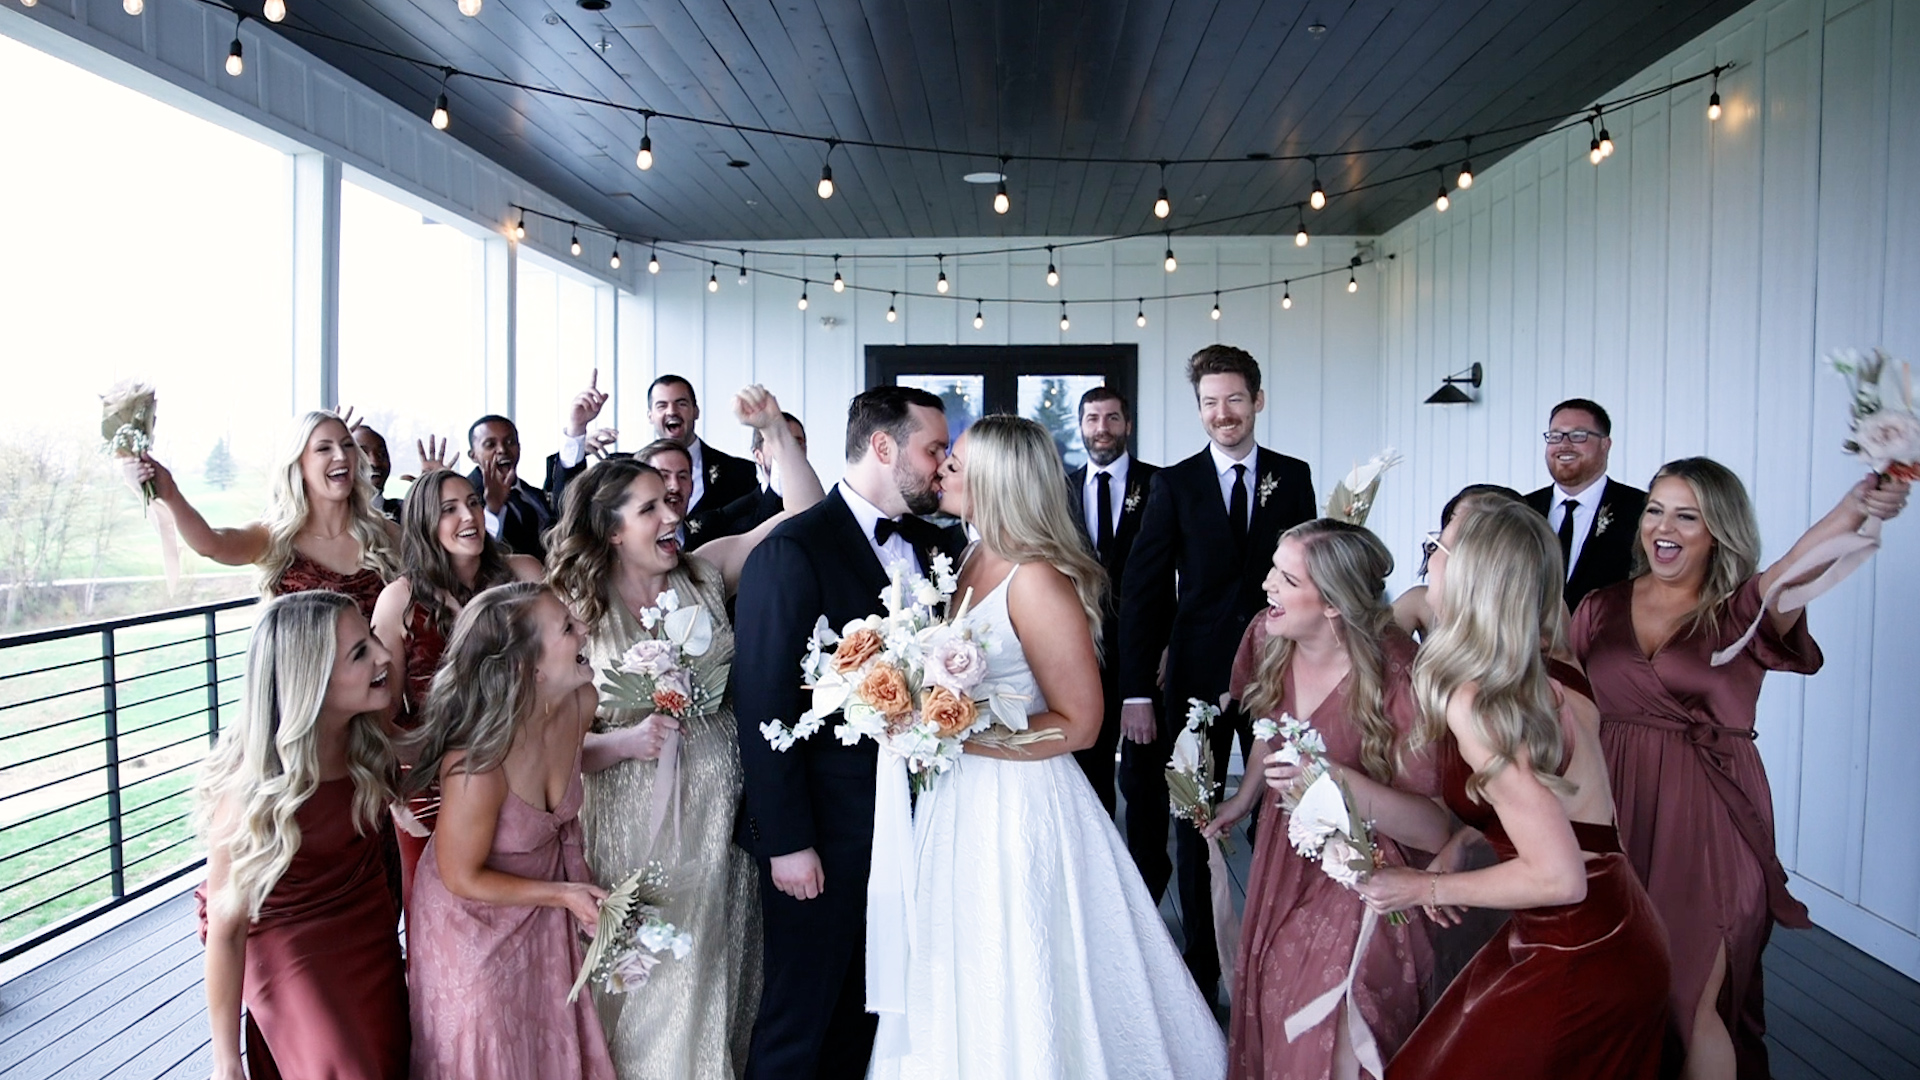 Newlyweds kiss under string lights on a porch while the wedding party celebrates around them Woodhaven weddings